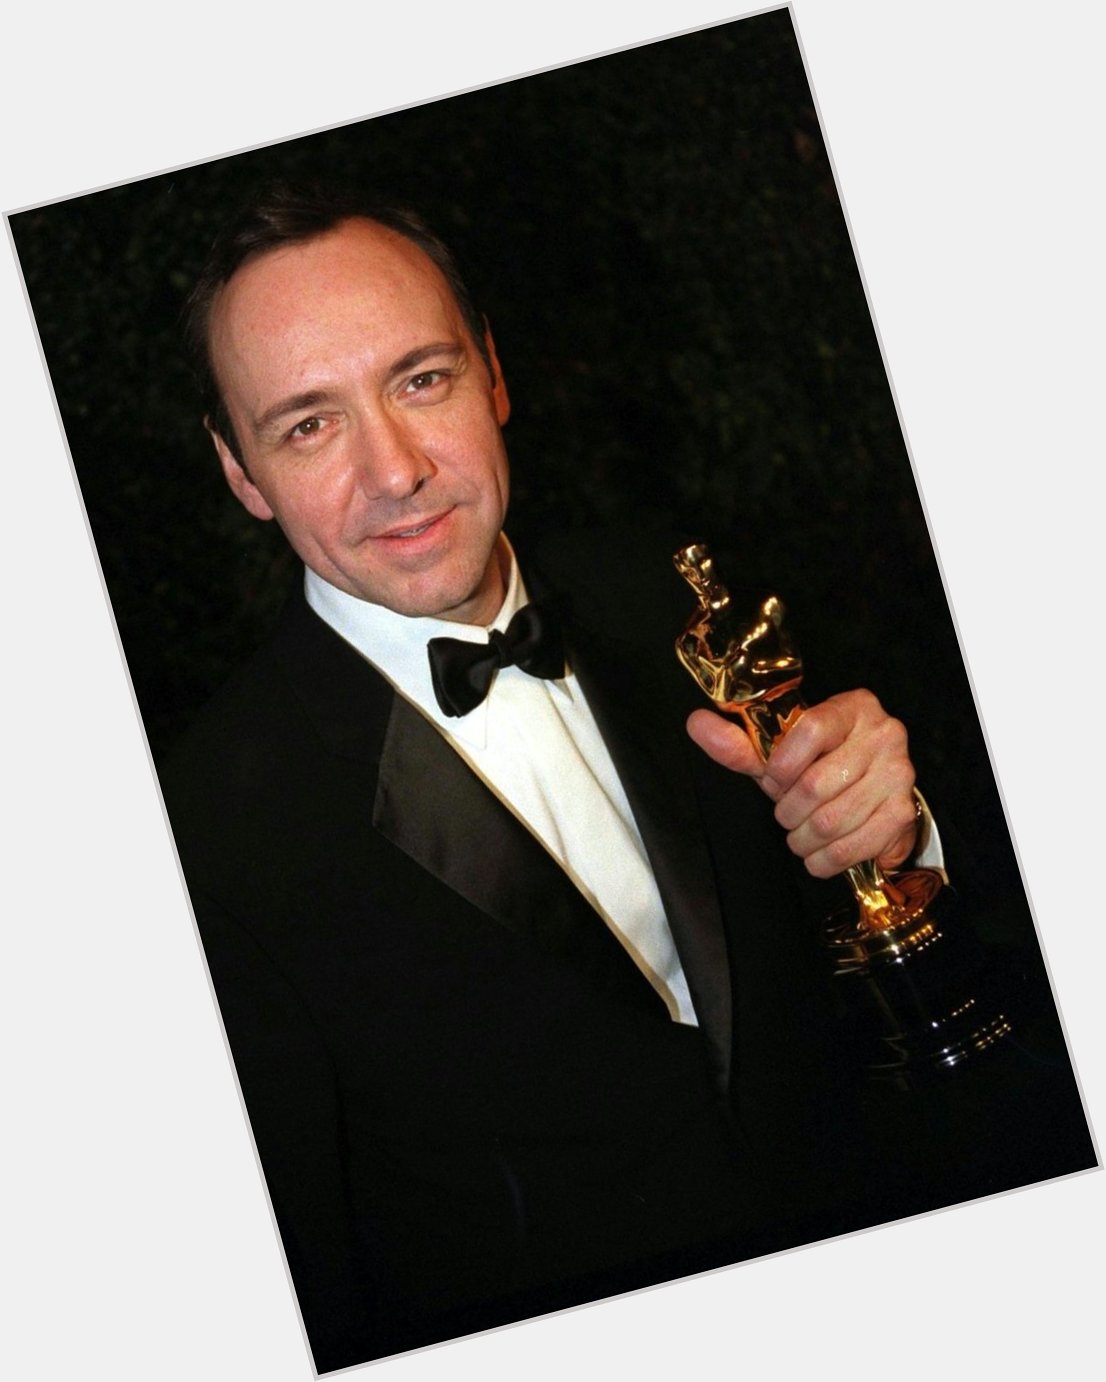 The Docs wanna wish a happy birthday to an Oscar winning icon and impersonator extraordinaire, Kevin Spacey. 